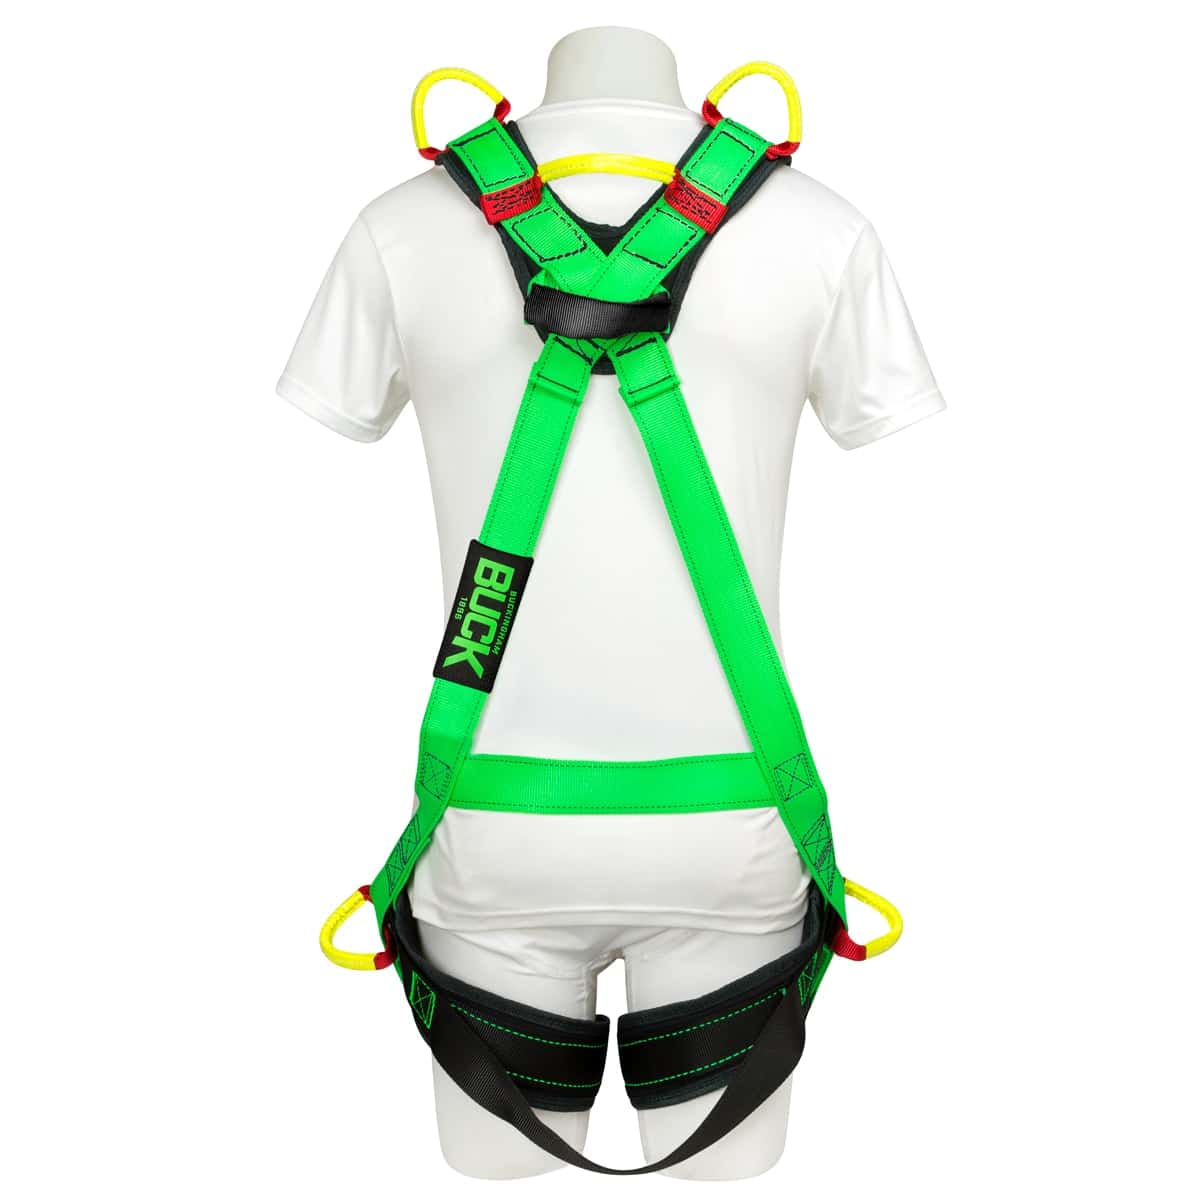 gear - Are manual double-back buckles on harnesses considered obsolete? -  The Great Outdoors Stack Exchange